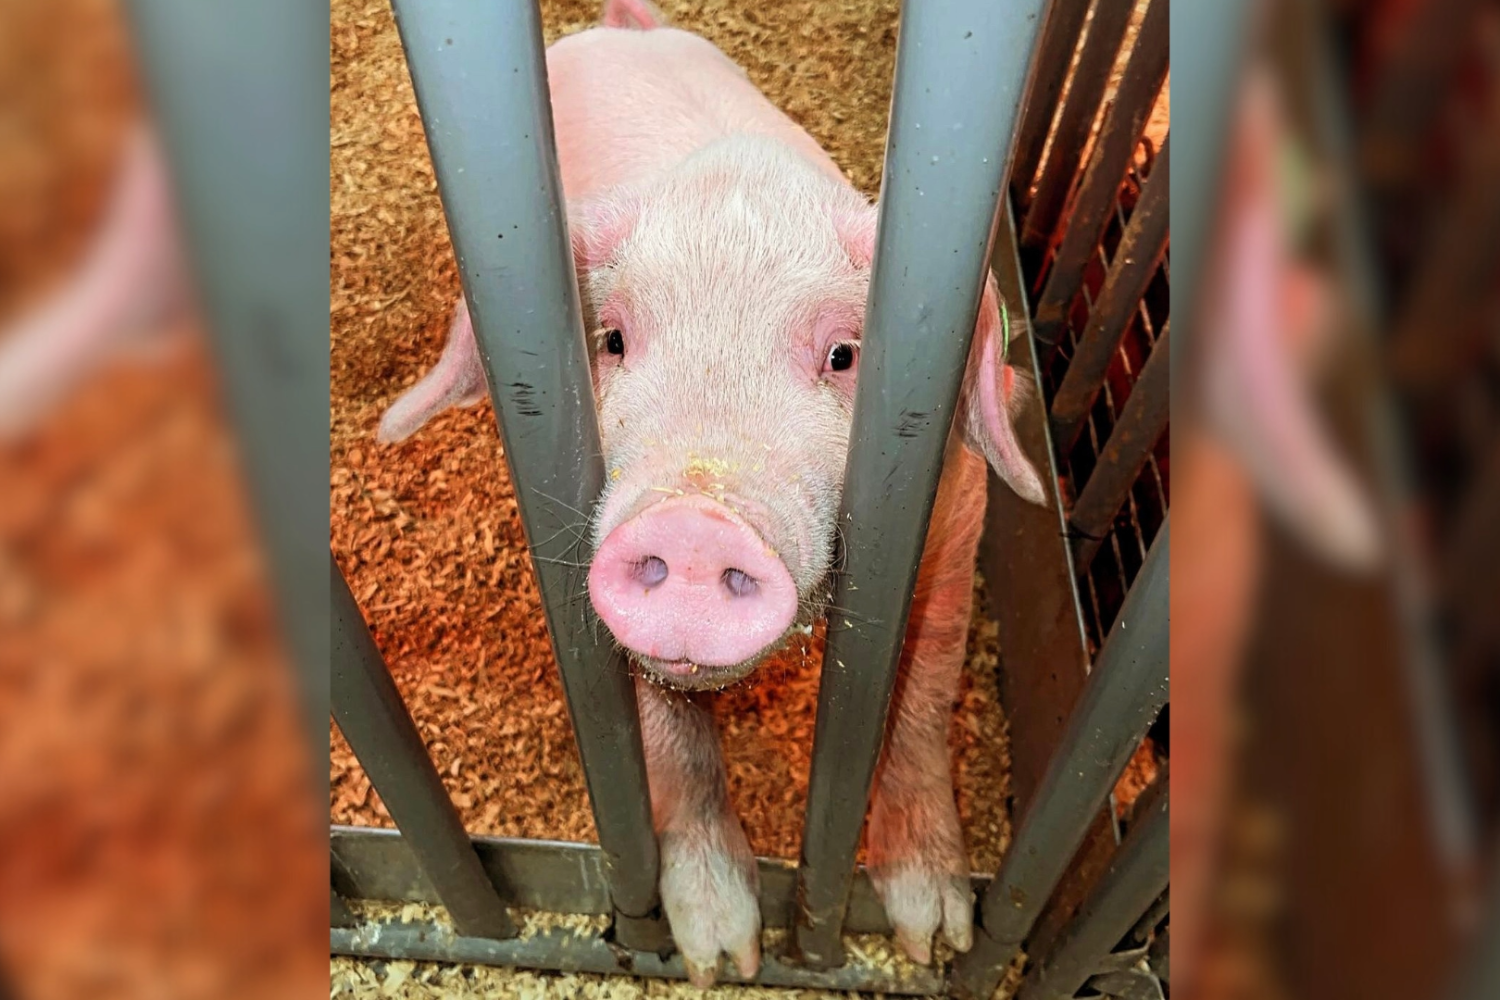 Instagram: an app most commonly used for friends to share pictures with each other. But one student took the app to a whole new level, and created an account for their pig, Dirk.